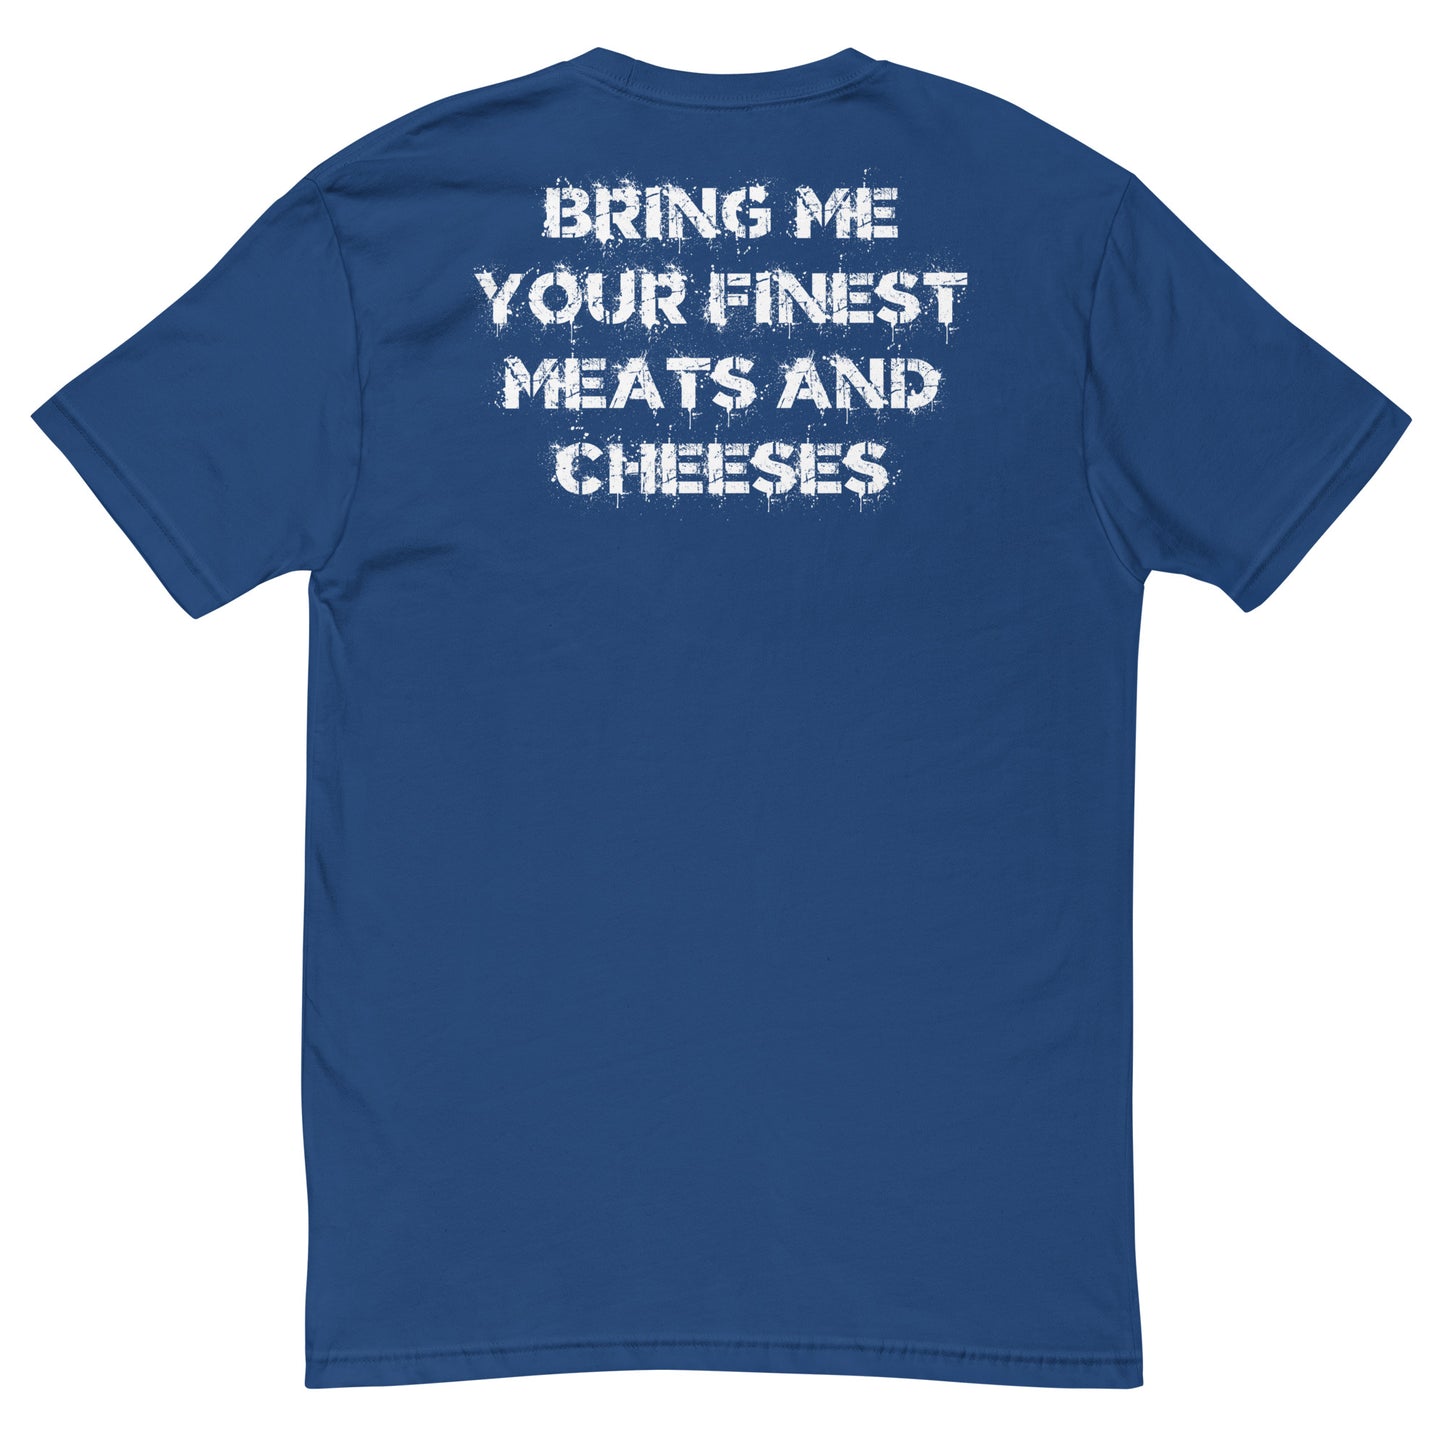 Meats and Cheeses T-shirt